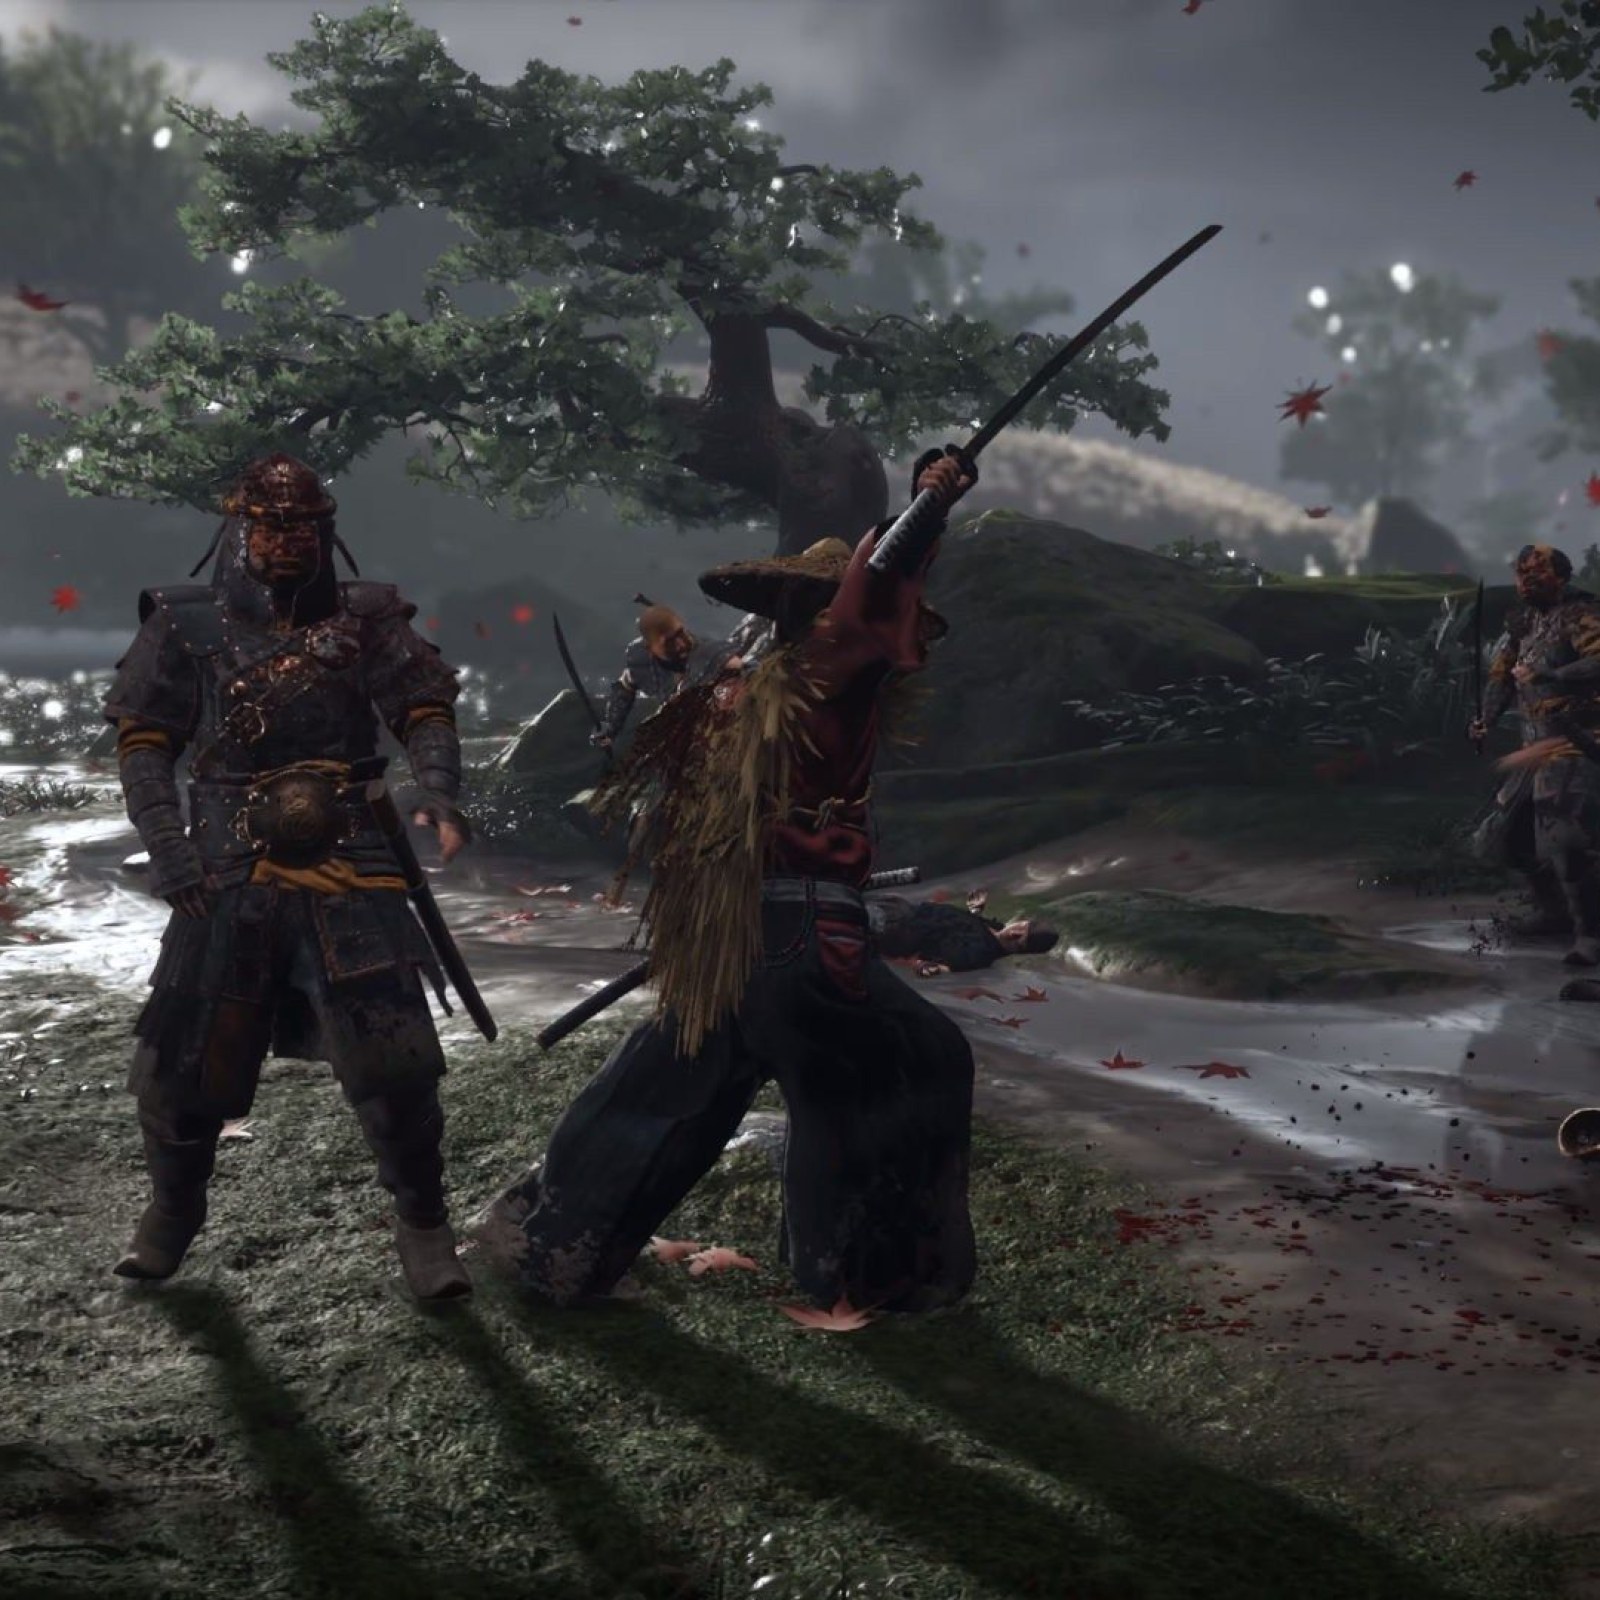 Ghost of Tsushima' Review Roundup: What the Critics Are Saying